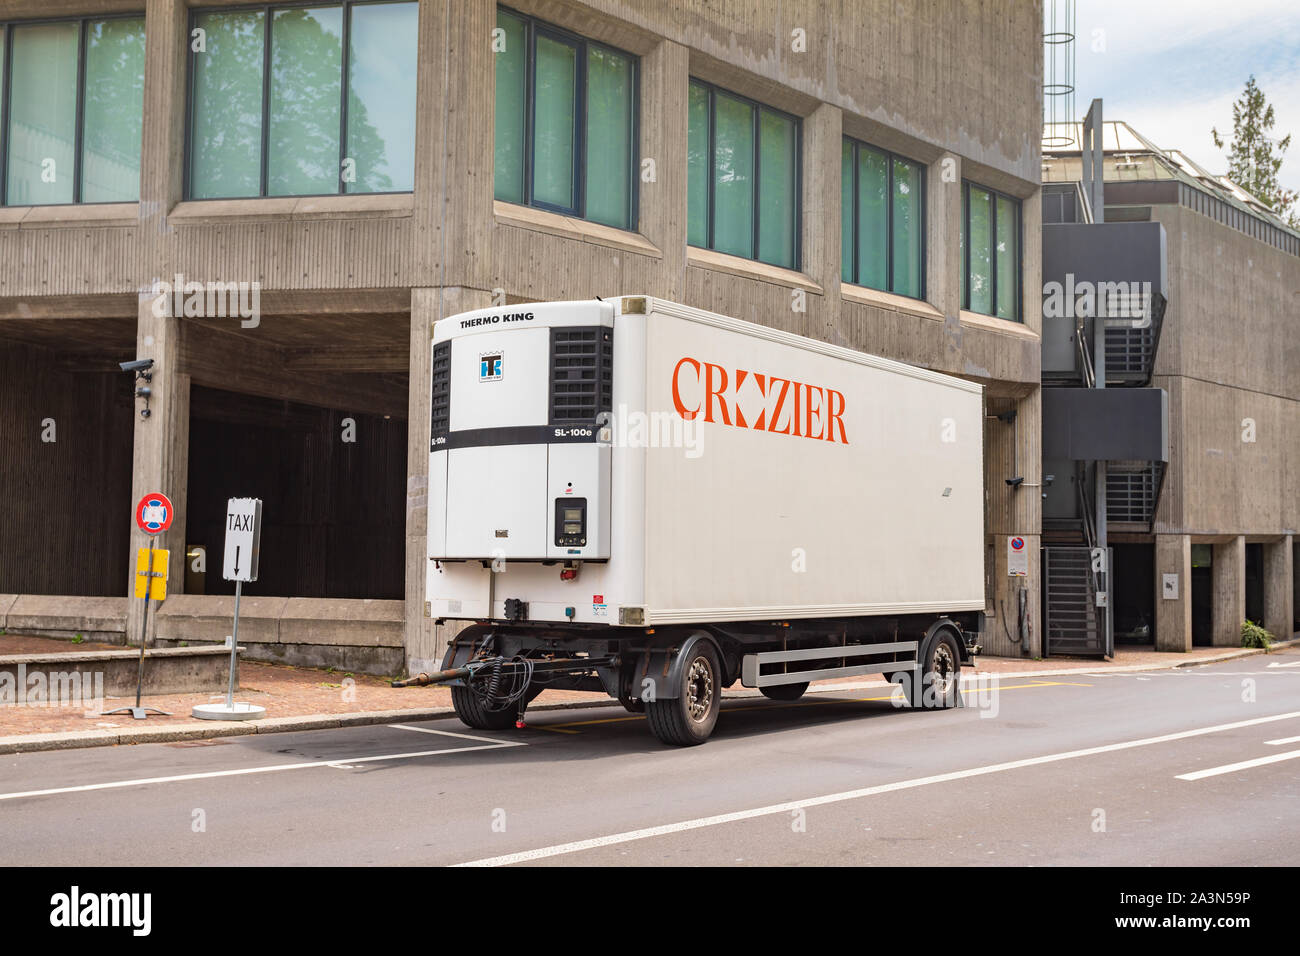 THERMO KING refrigeration unit model SL-100e on working on Zurich streets Stock Photo